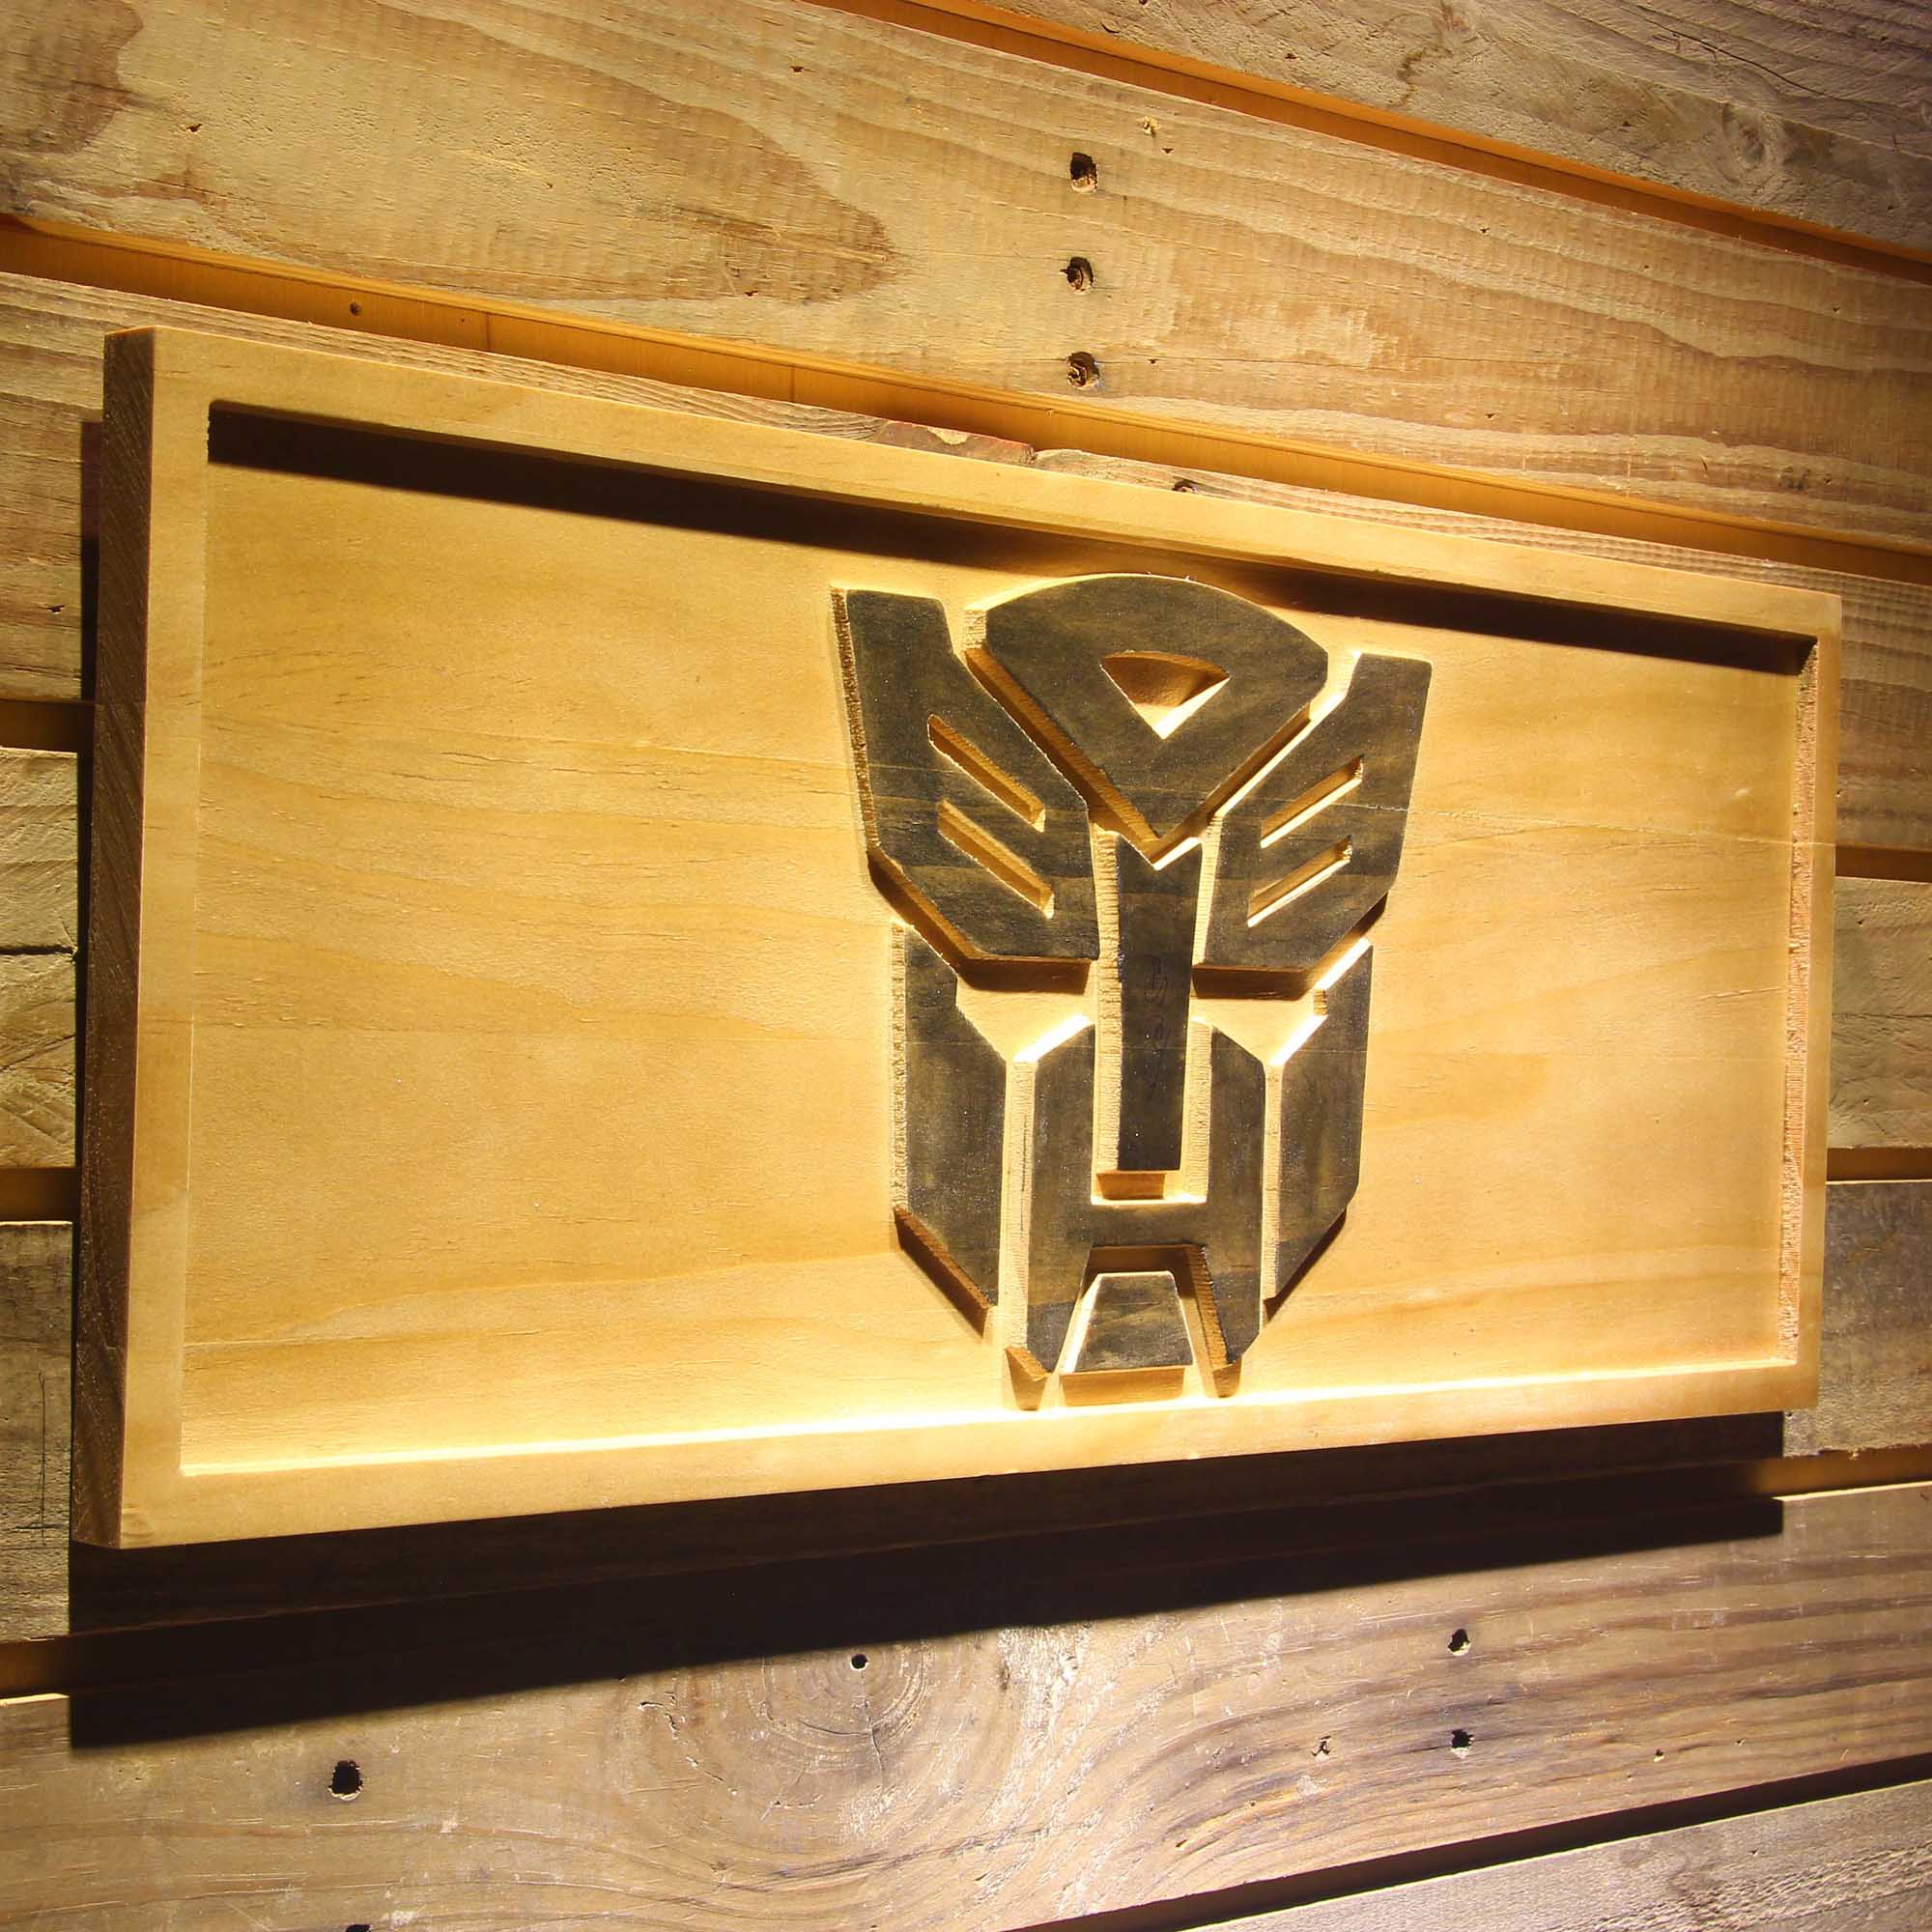 Transformers 3D Solid Wooden Craving Sign